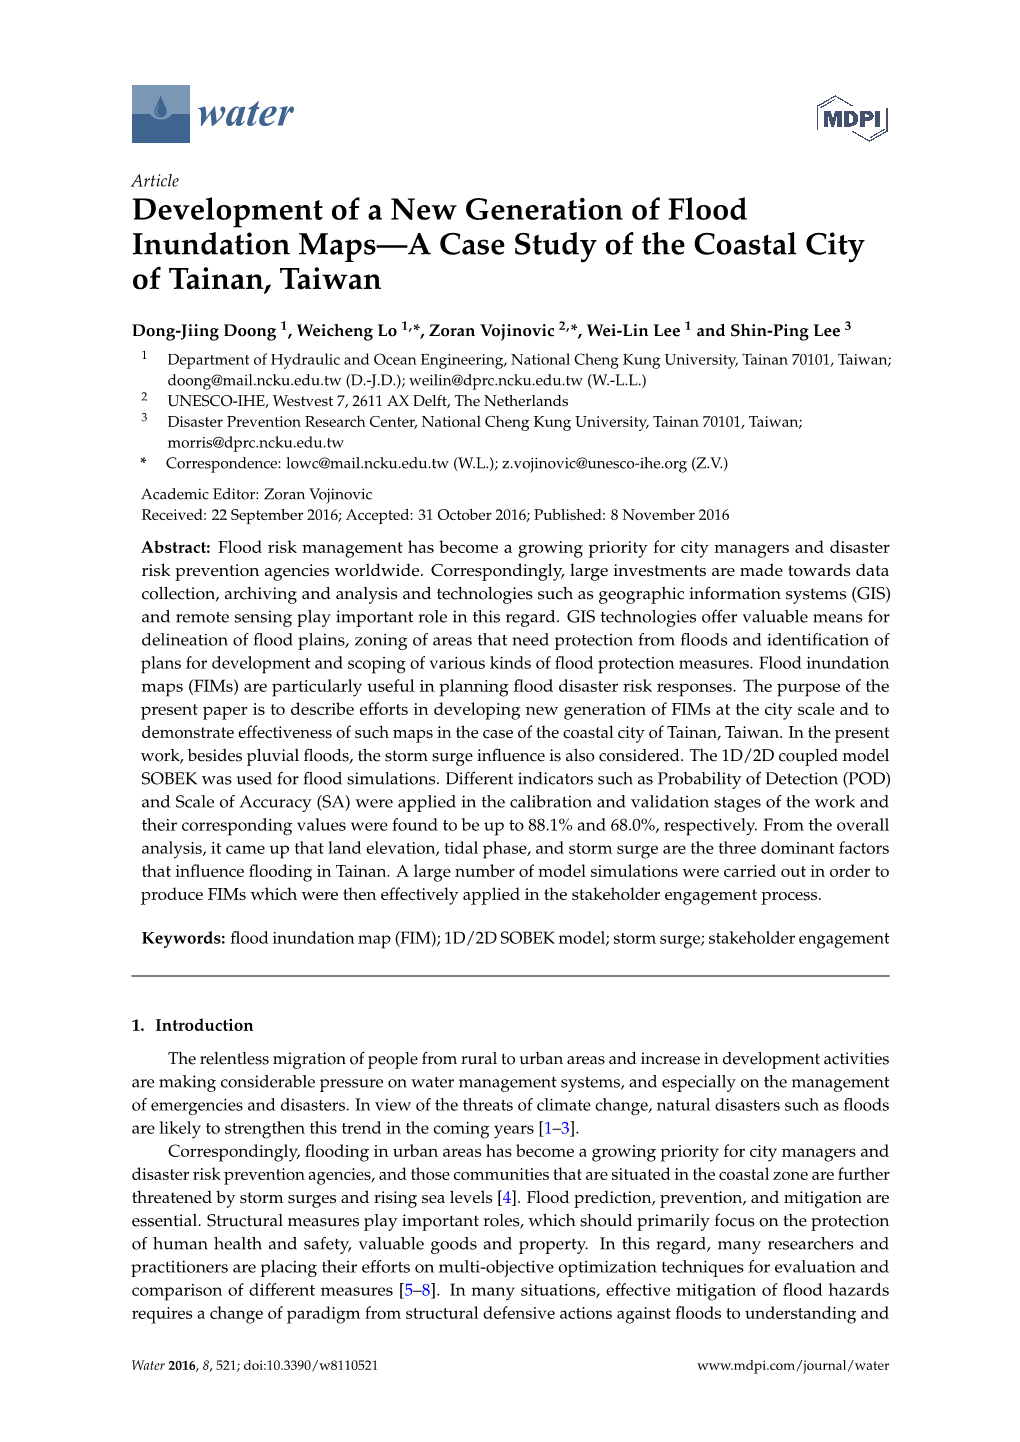 Development of a New Generation of Flood Inundation Maps—A Case Study of the Coastal City of Tainan, Taiwan